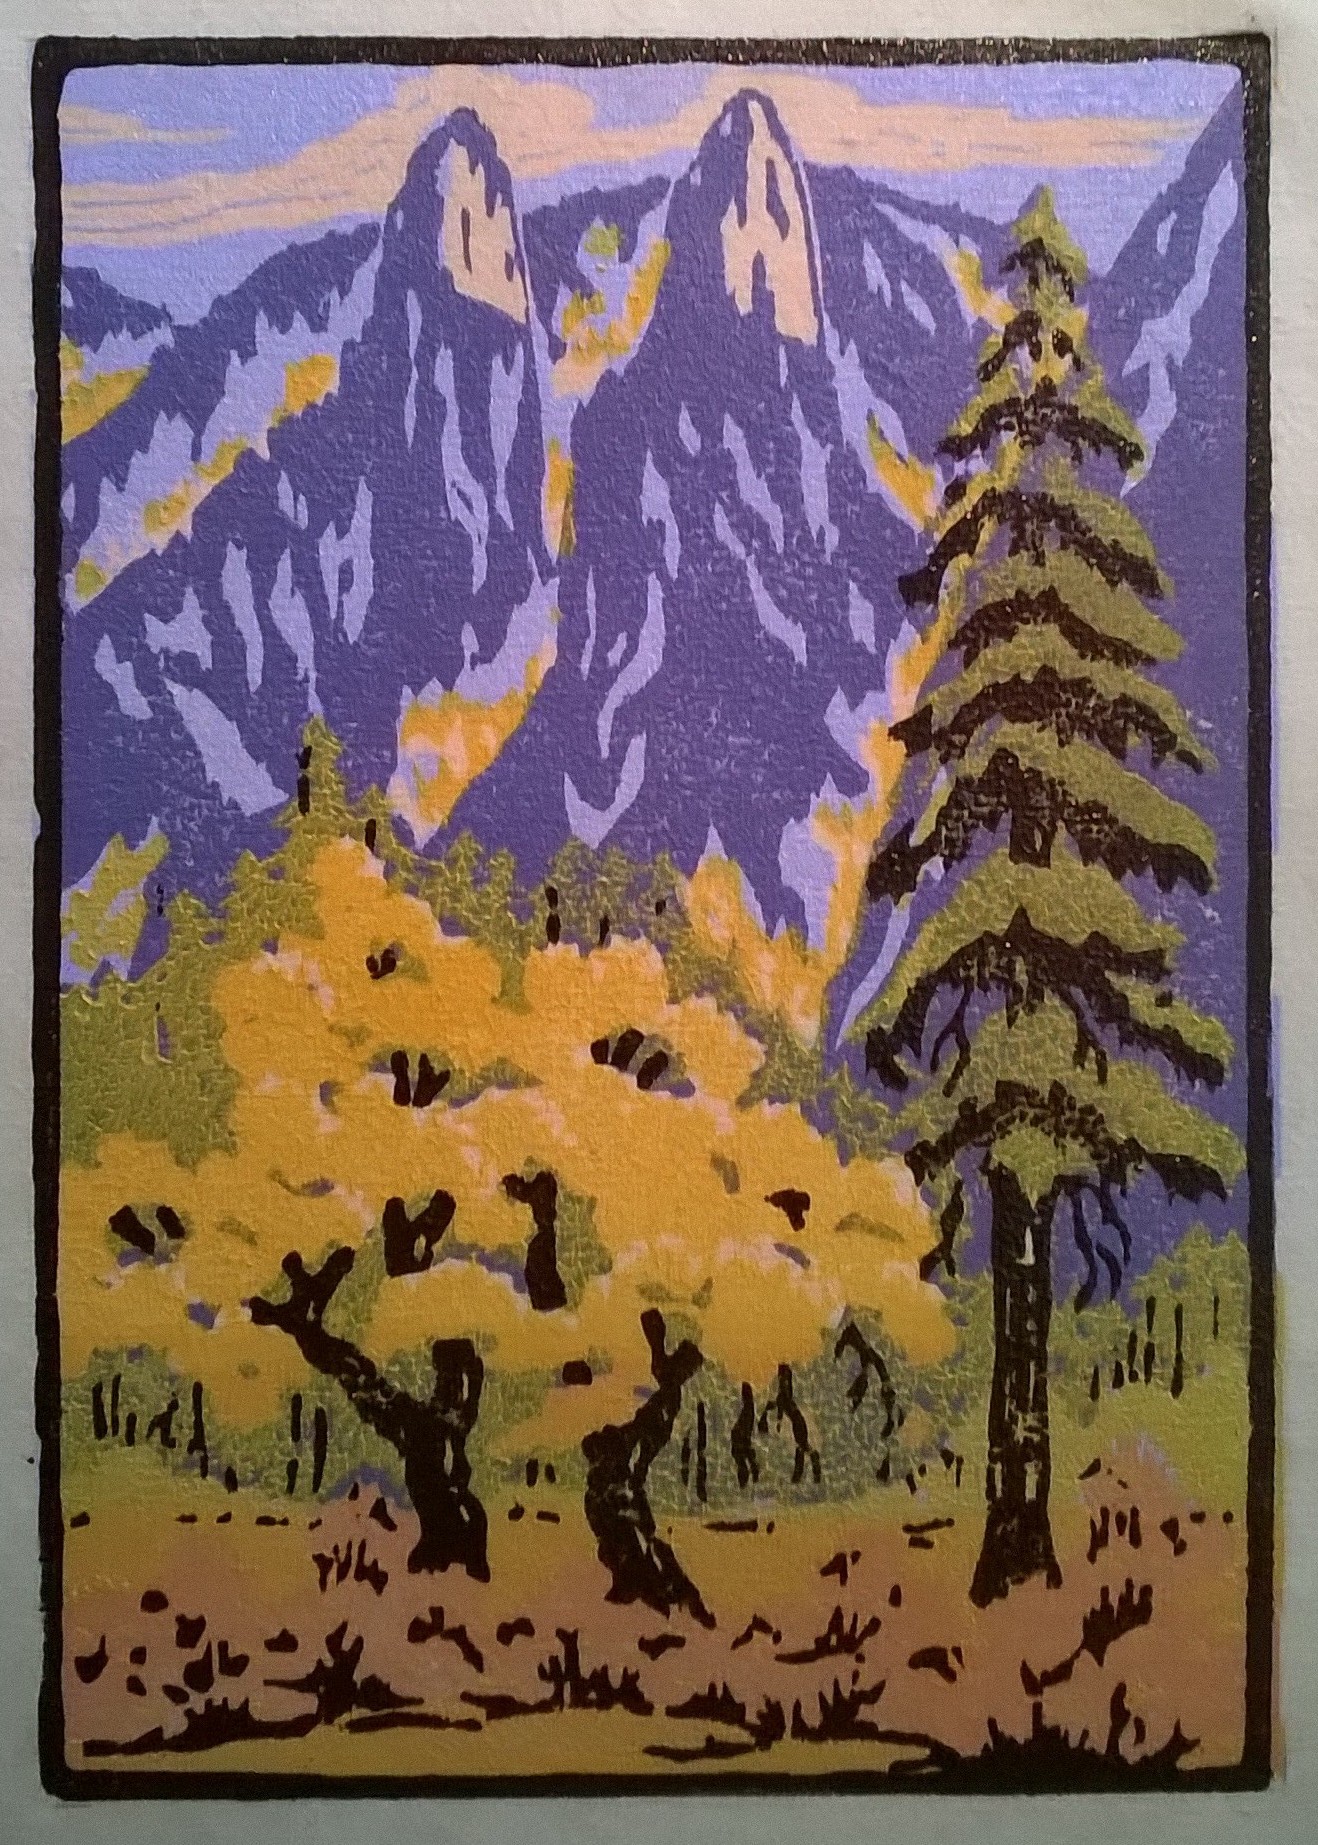 Cathedral Spires Fall | Woodcut by Martino Hoss | Original blocks carved in 1928 by Della Taylor Hoss, 5.25 x 7.5 in | $250